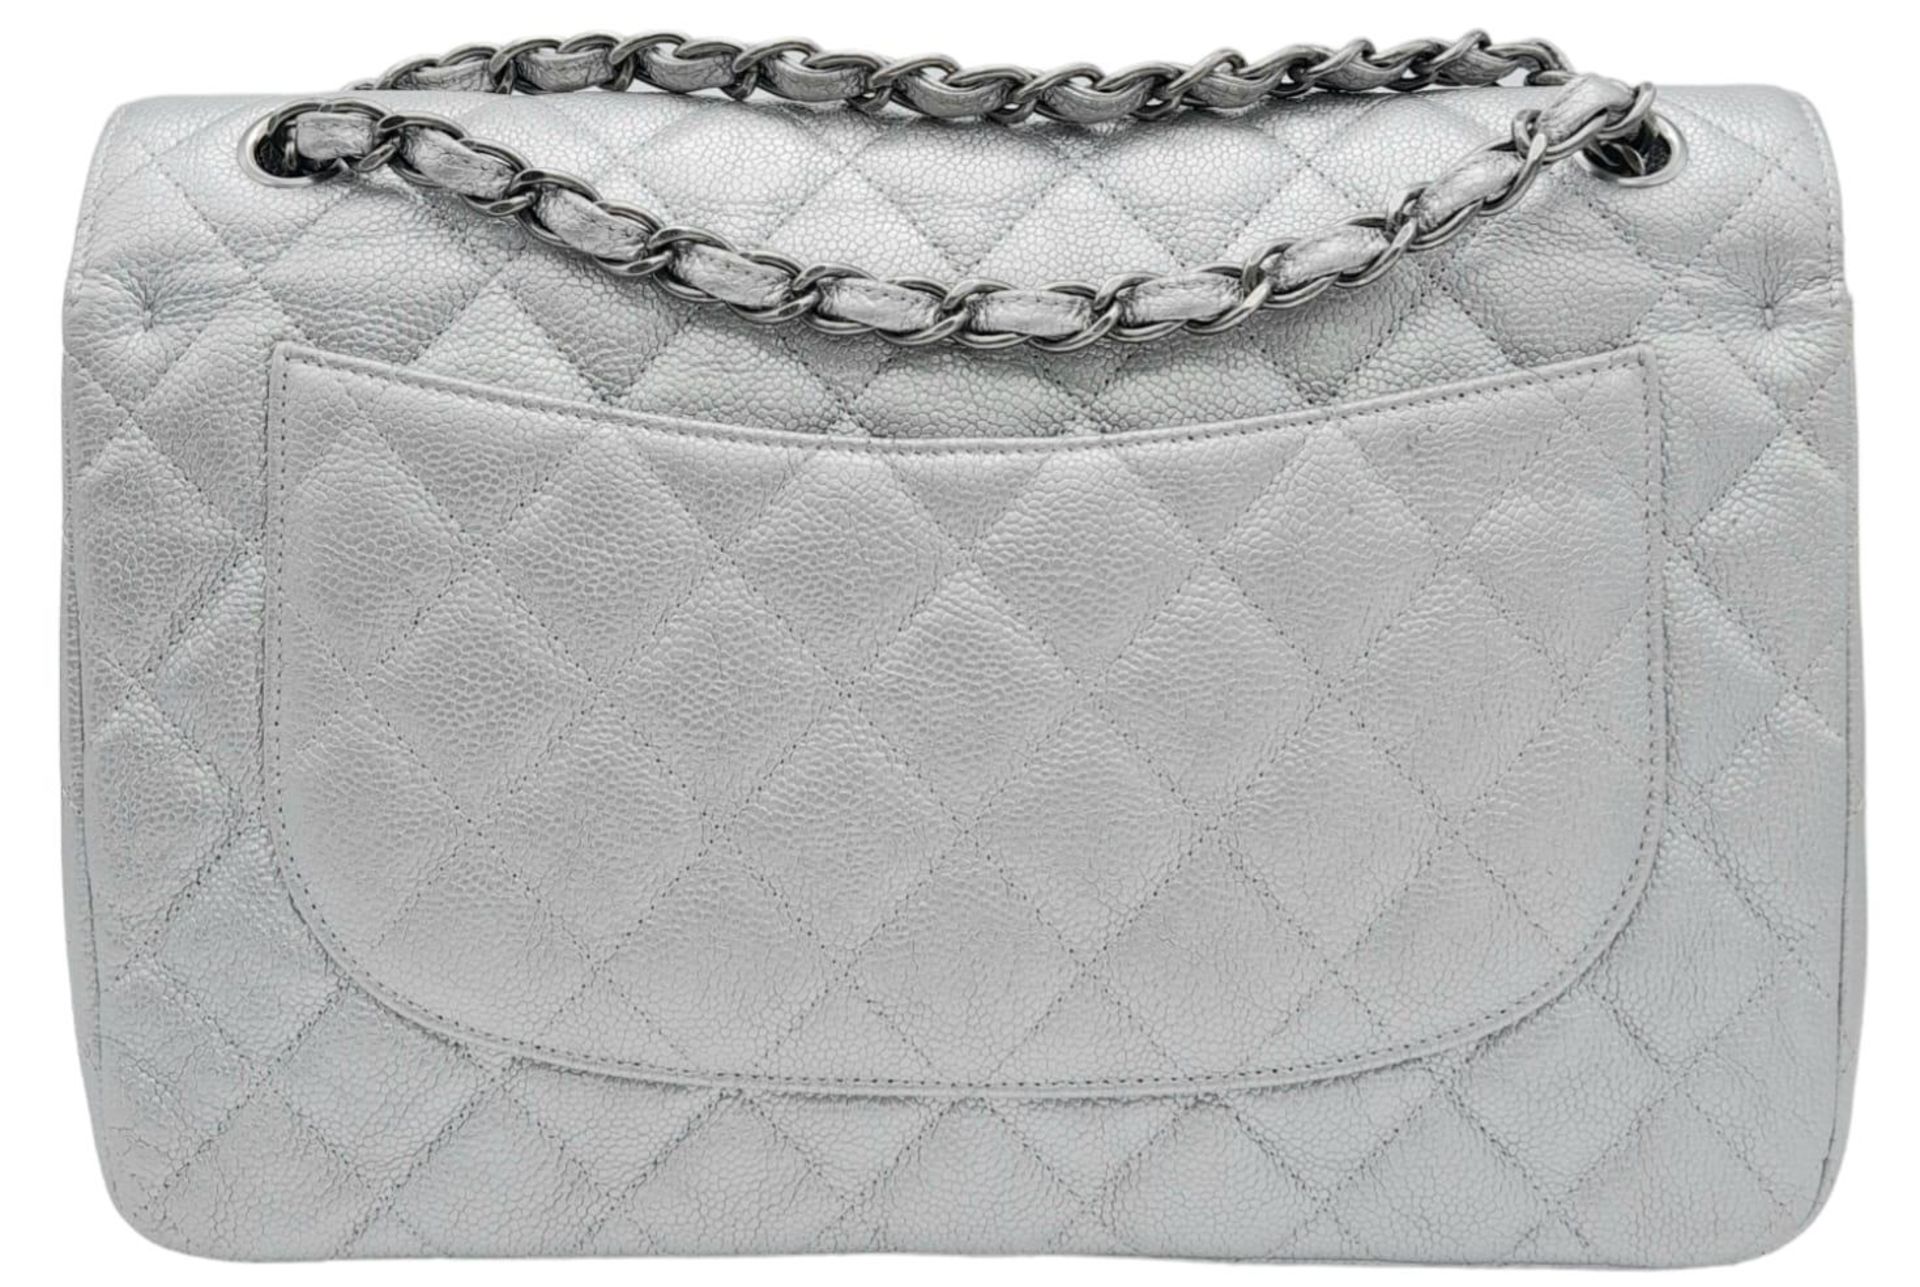 A Chanel Metallic Silver Double Flap Jumbo Bag. Quilted caviar leather. Silver tone hardware. Double - Bild 5 aus 12